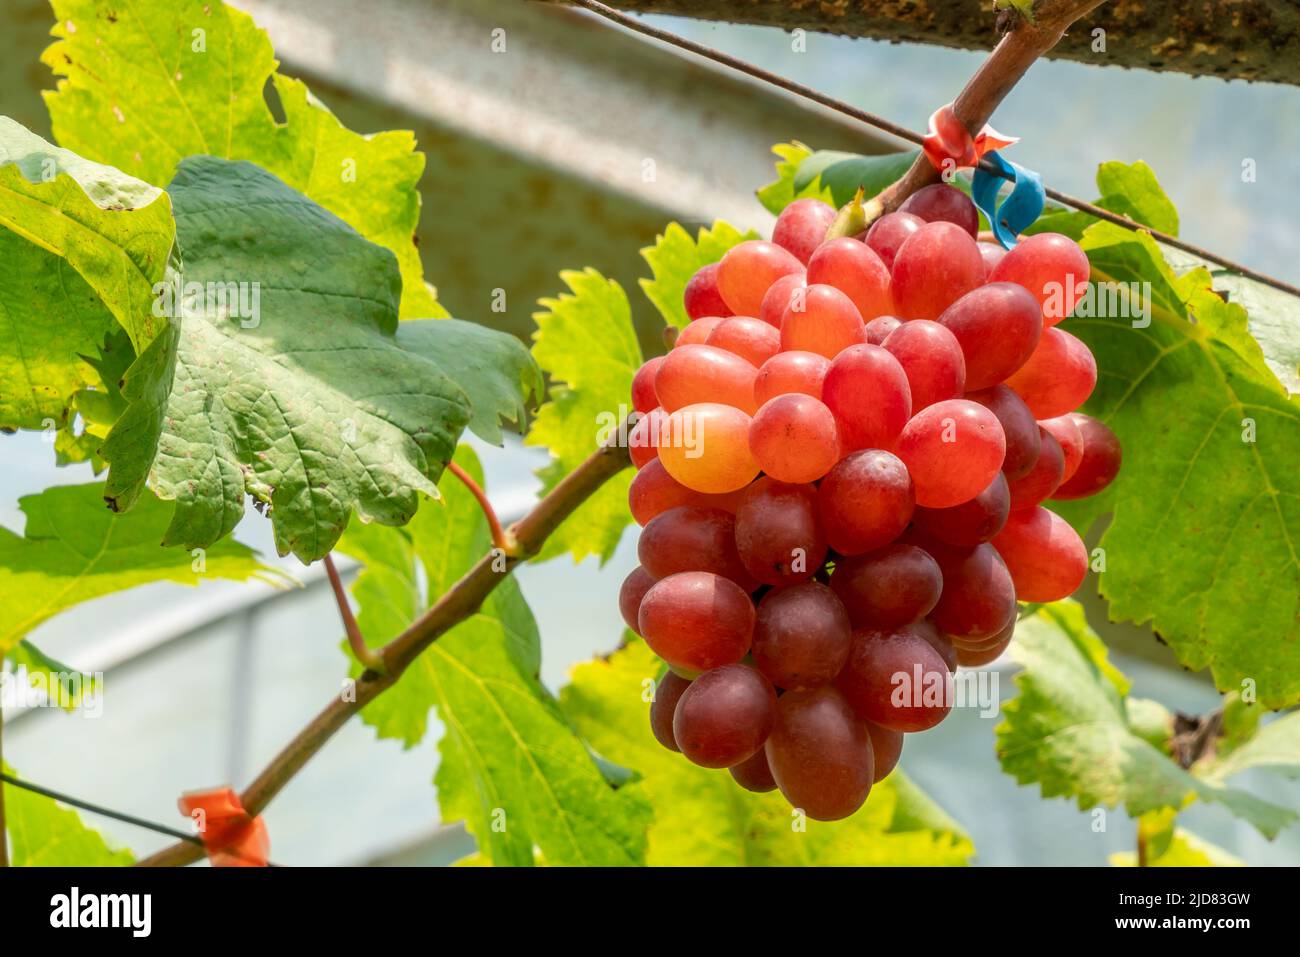 Bunch of crimson seedless graoes growing on a vine with green leaves inside a rural vineyard. Stock Photo